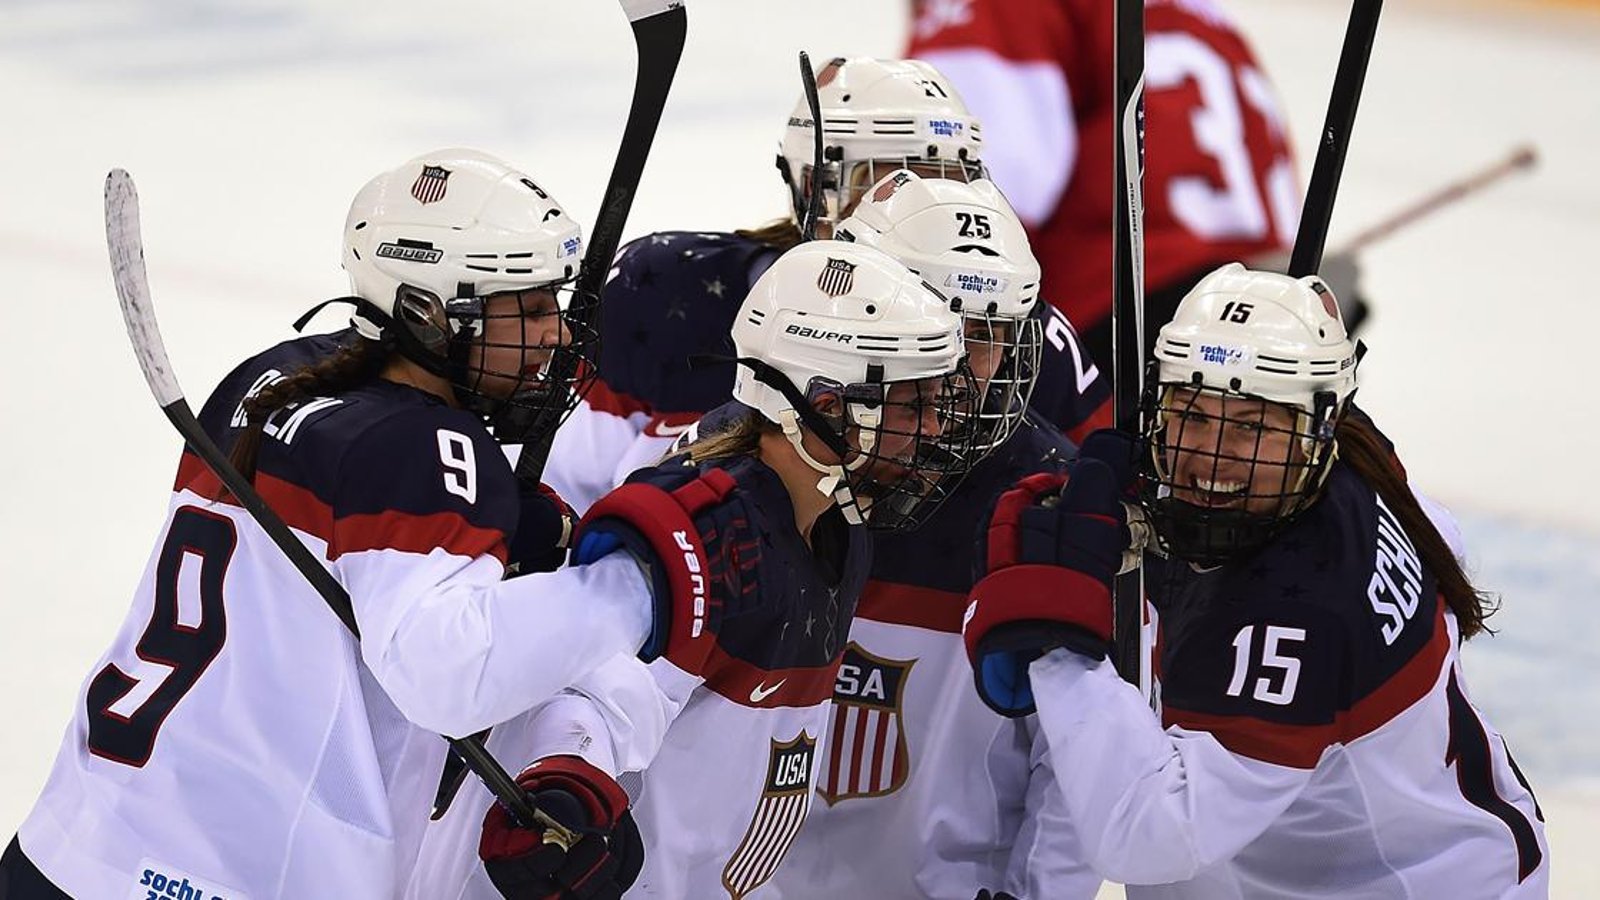 MAJOR support given to US Women hockey team. 